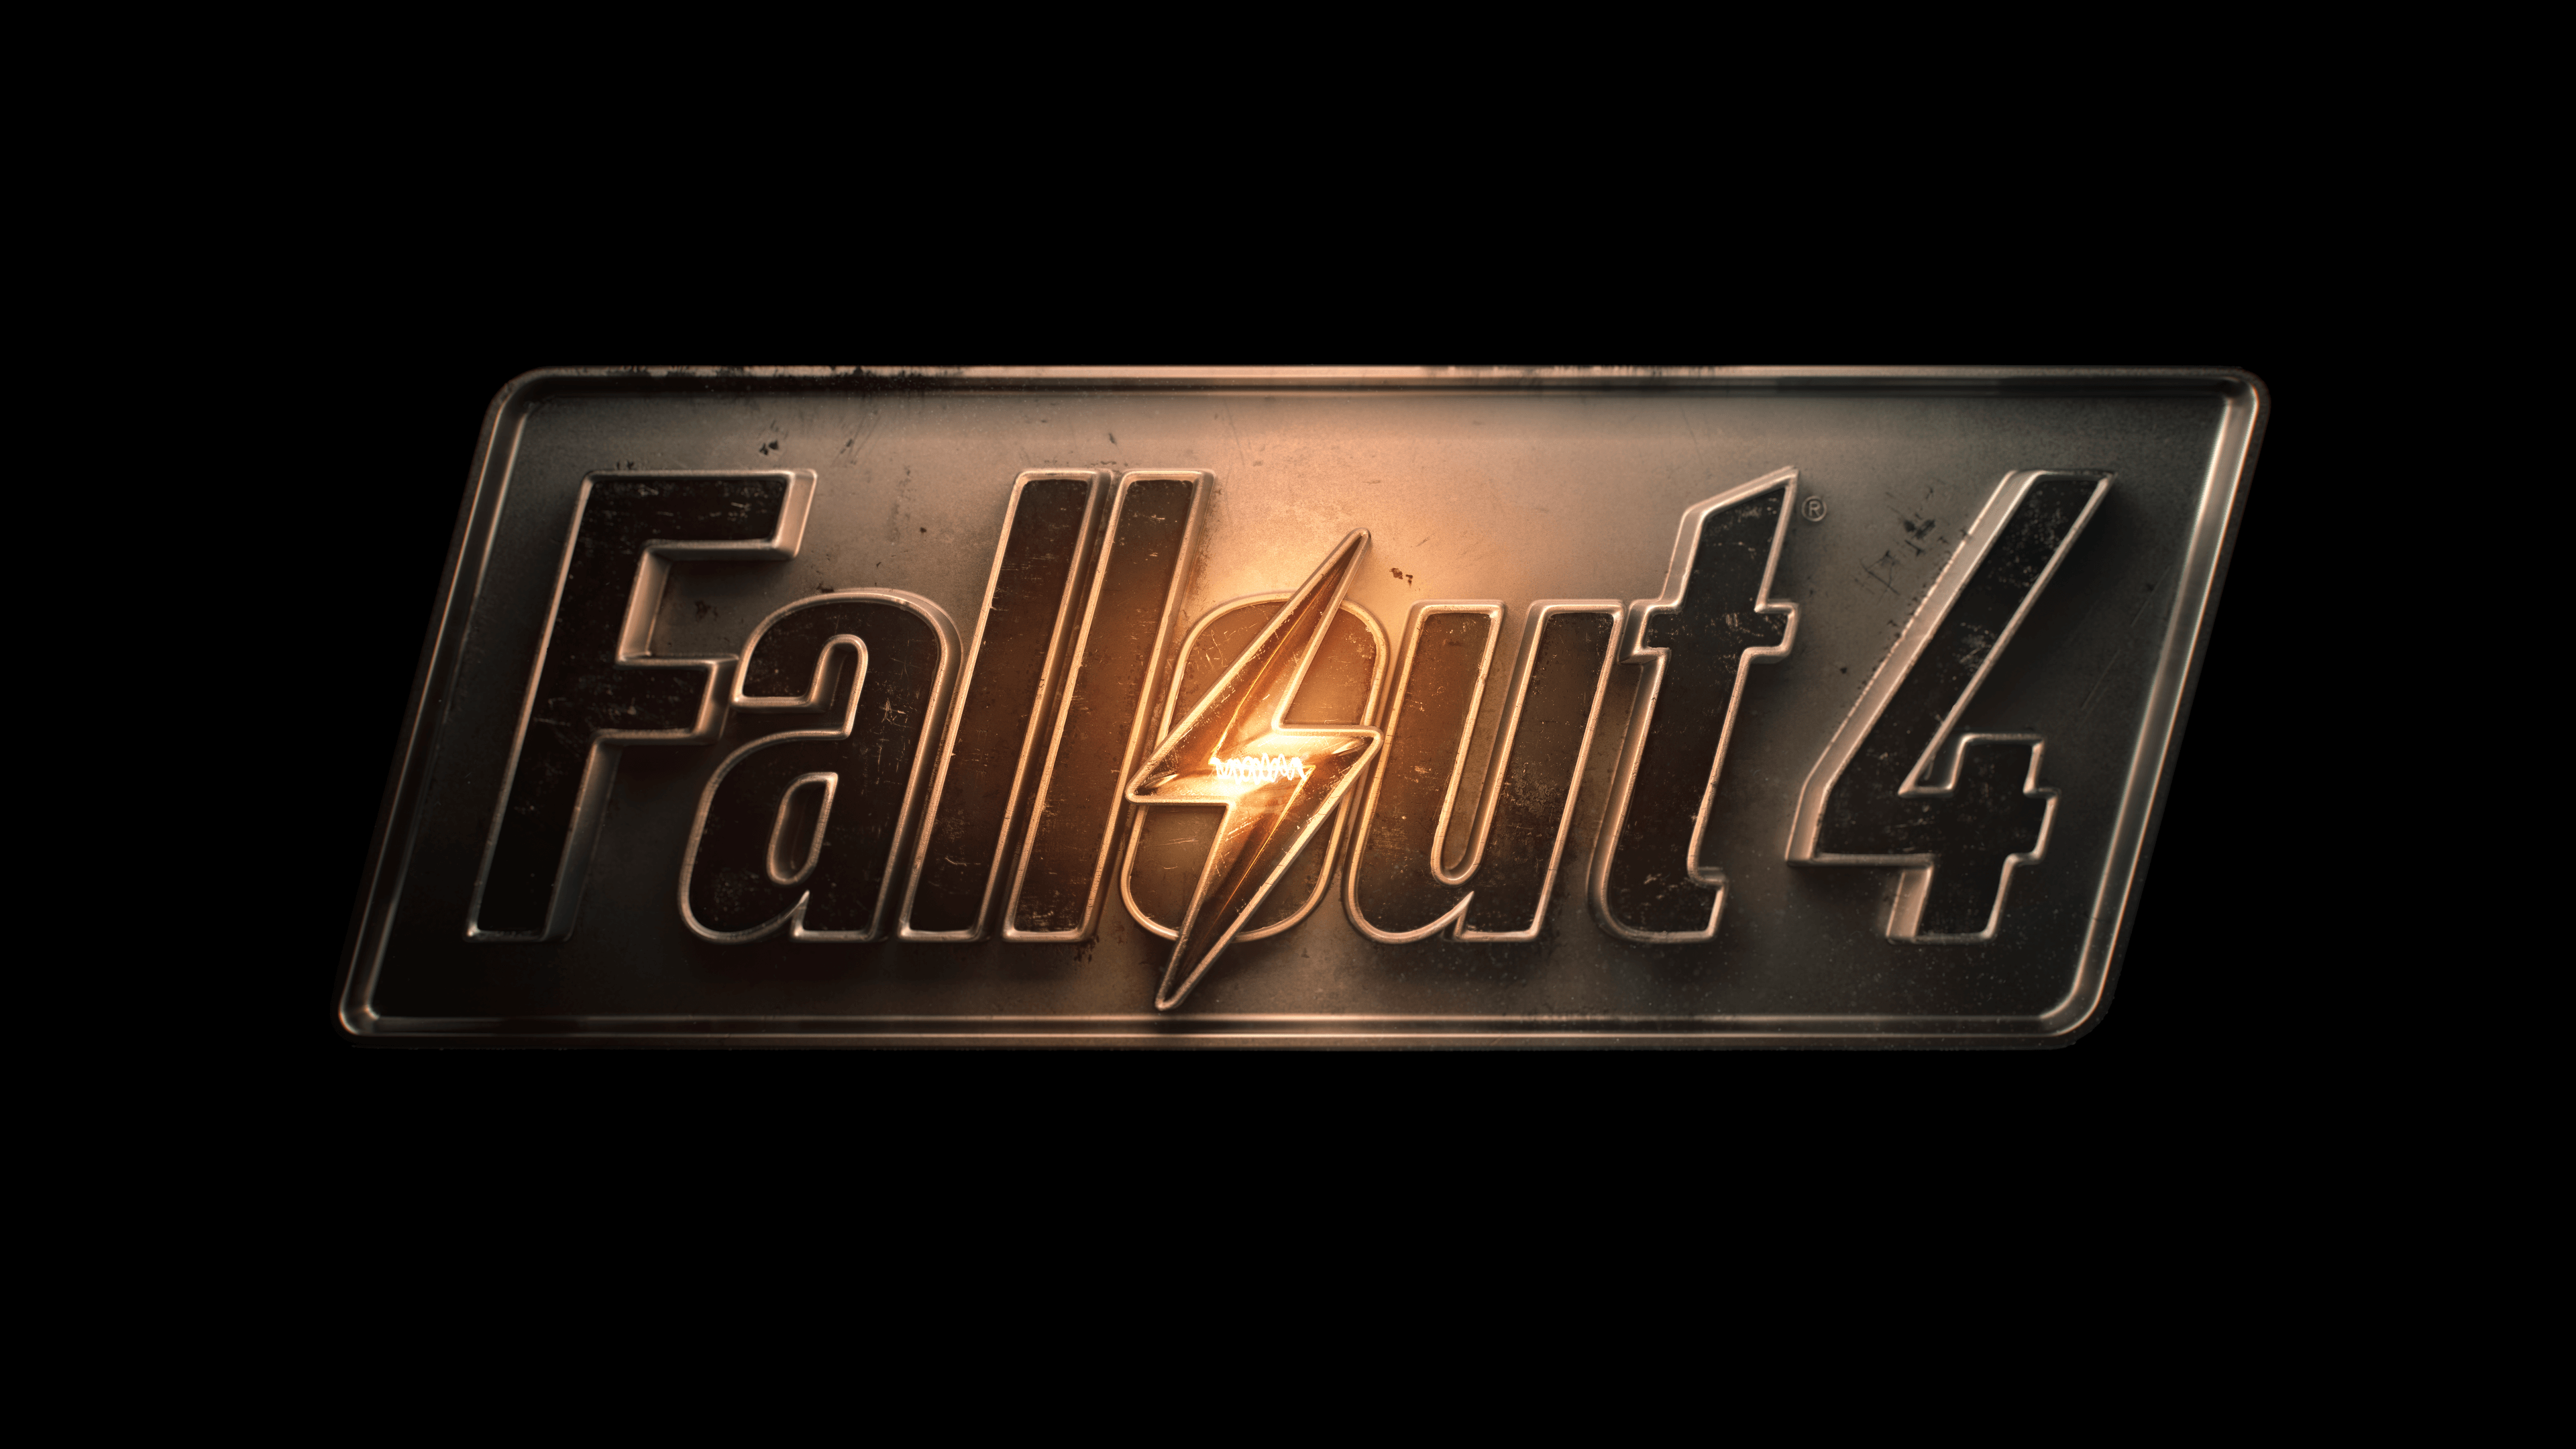 Fallout 4 Wallpaper, Picture, Image